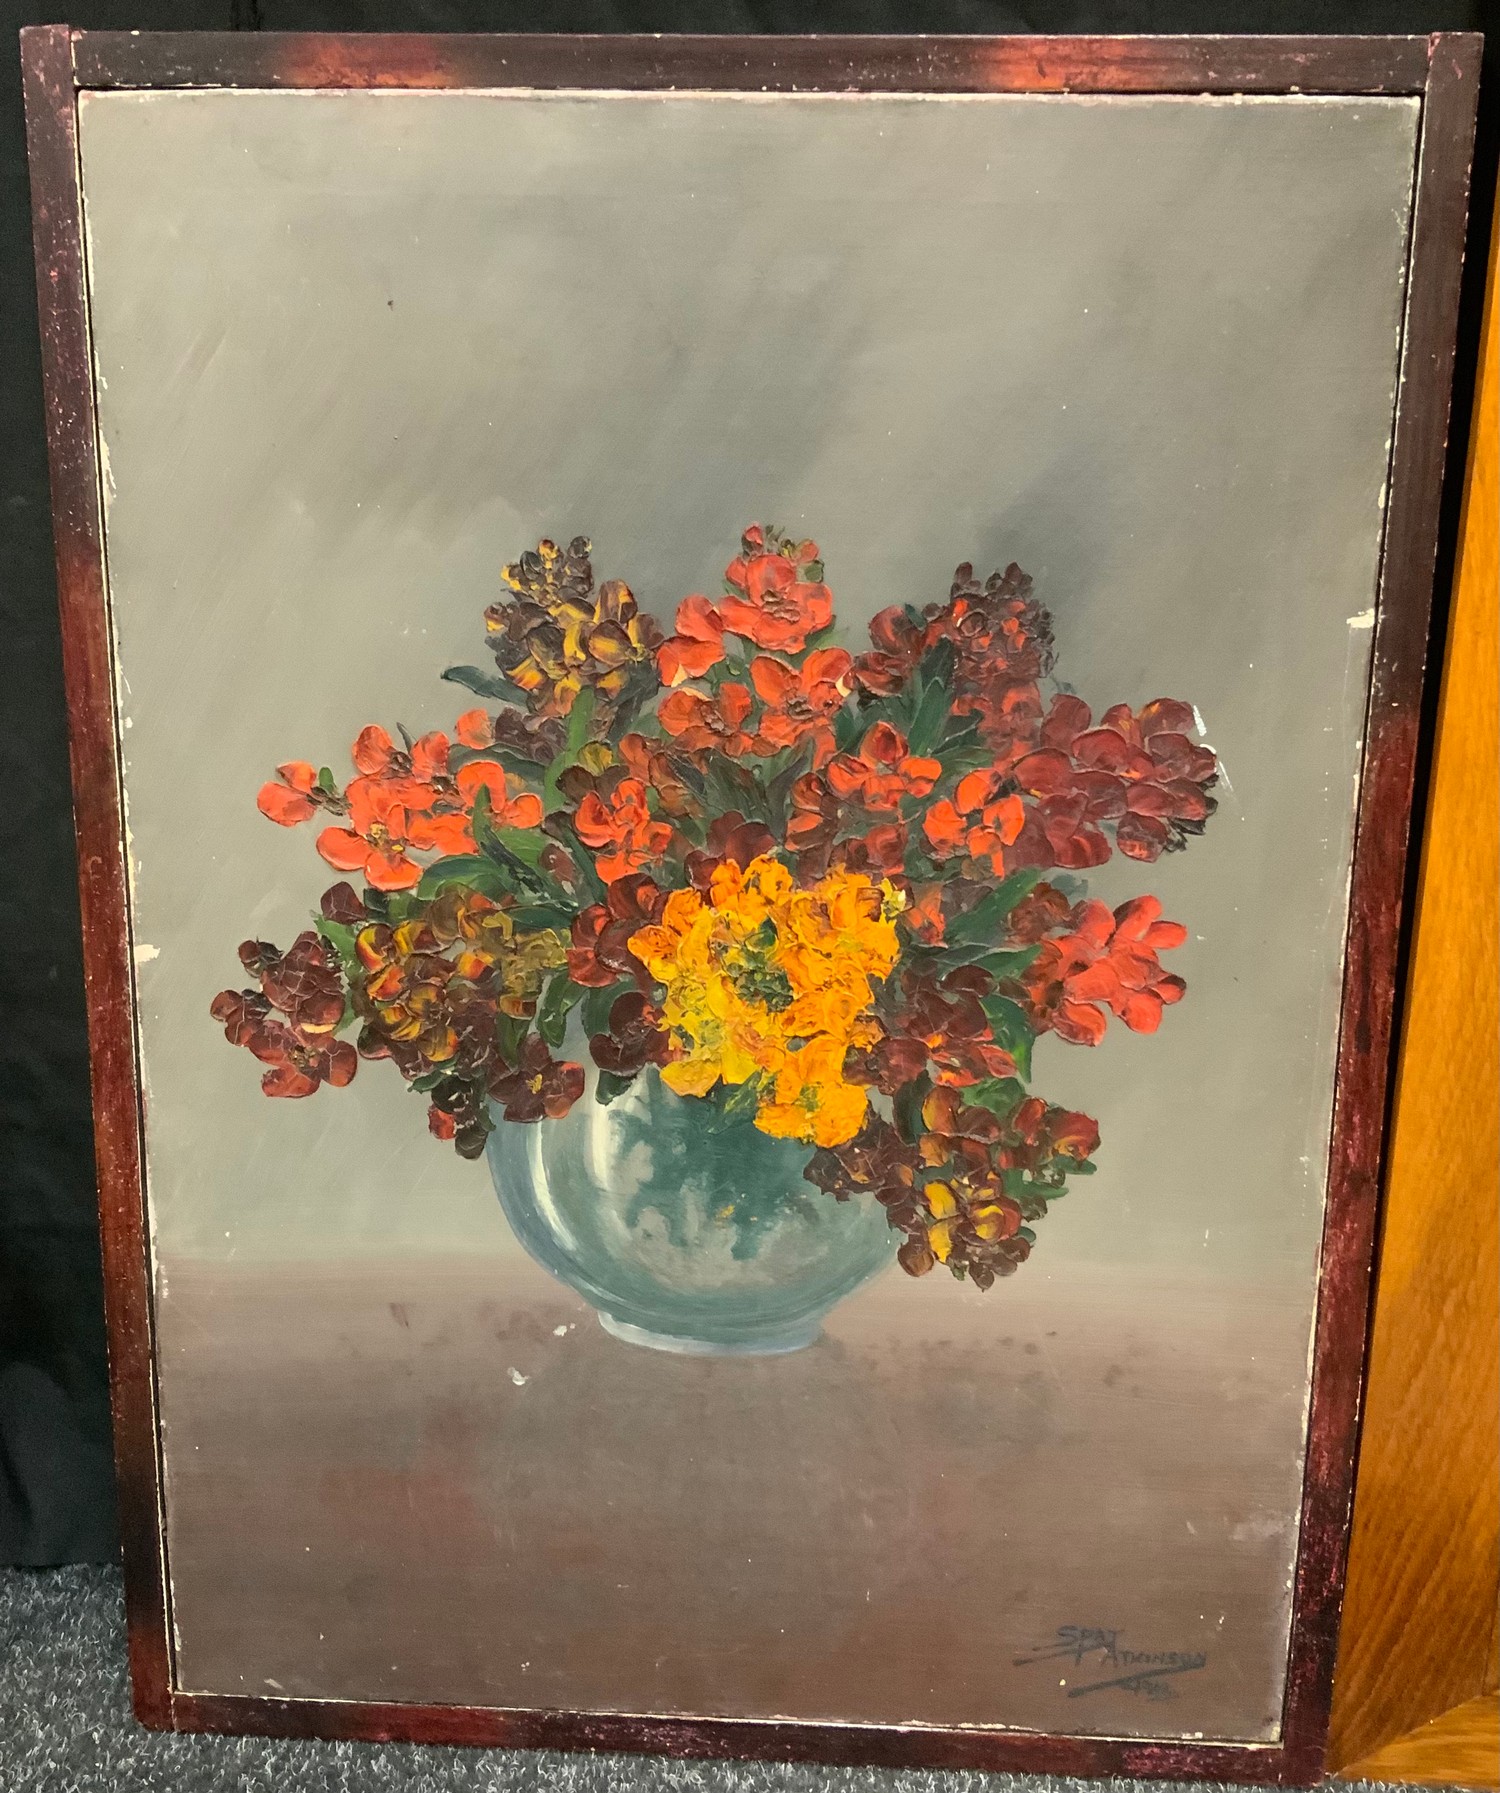 S P Atkinson (20th century) Still Life Flowers, signed, oil on canvas, 59.5cm x 49.5cm; another, - Image 3 of 5